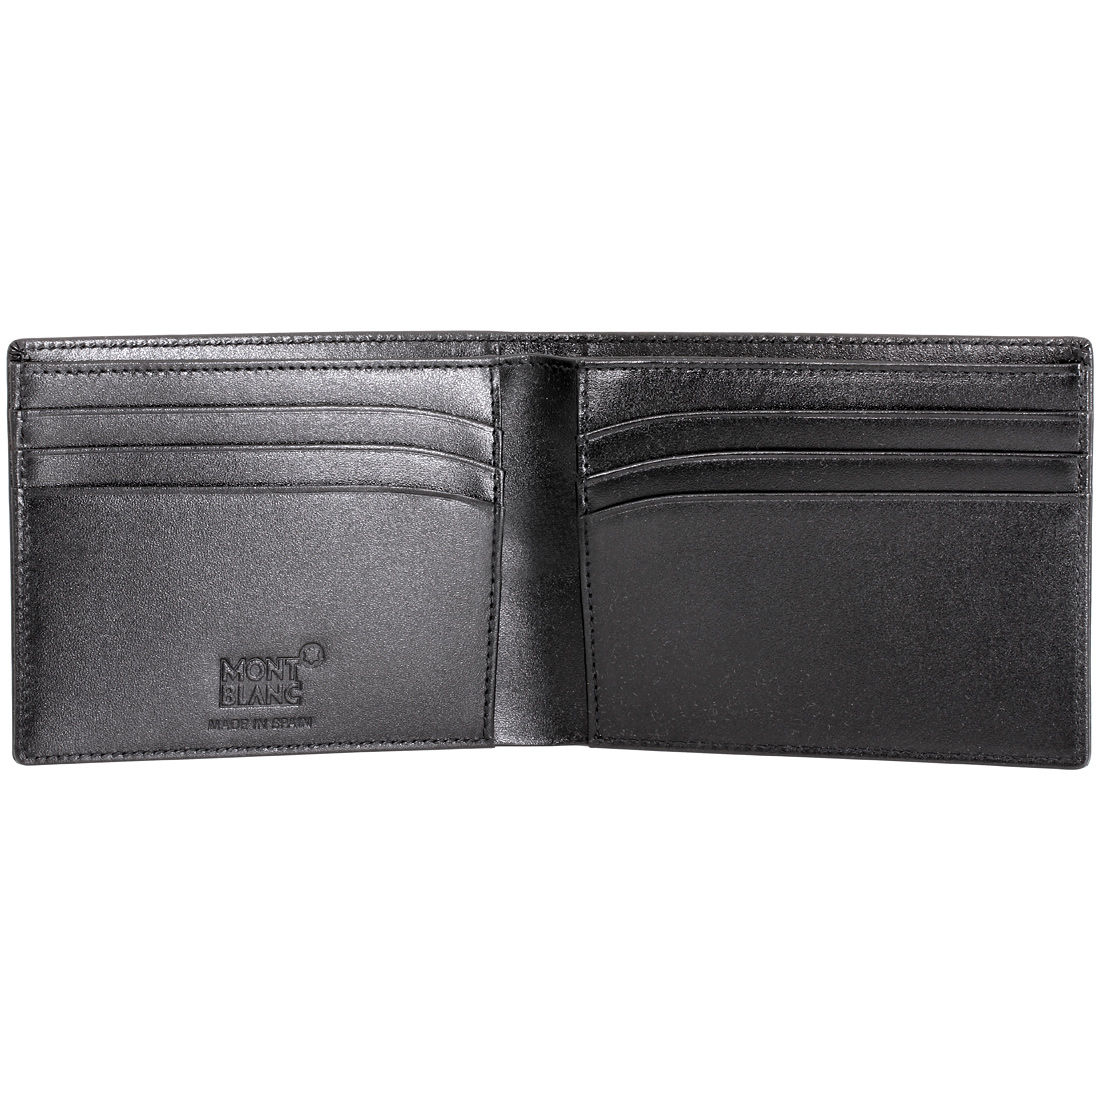 Montblanc Meisterstuck Men's Small Leather Wallet 14548 4017941145482 ...